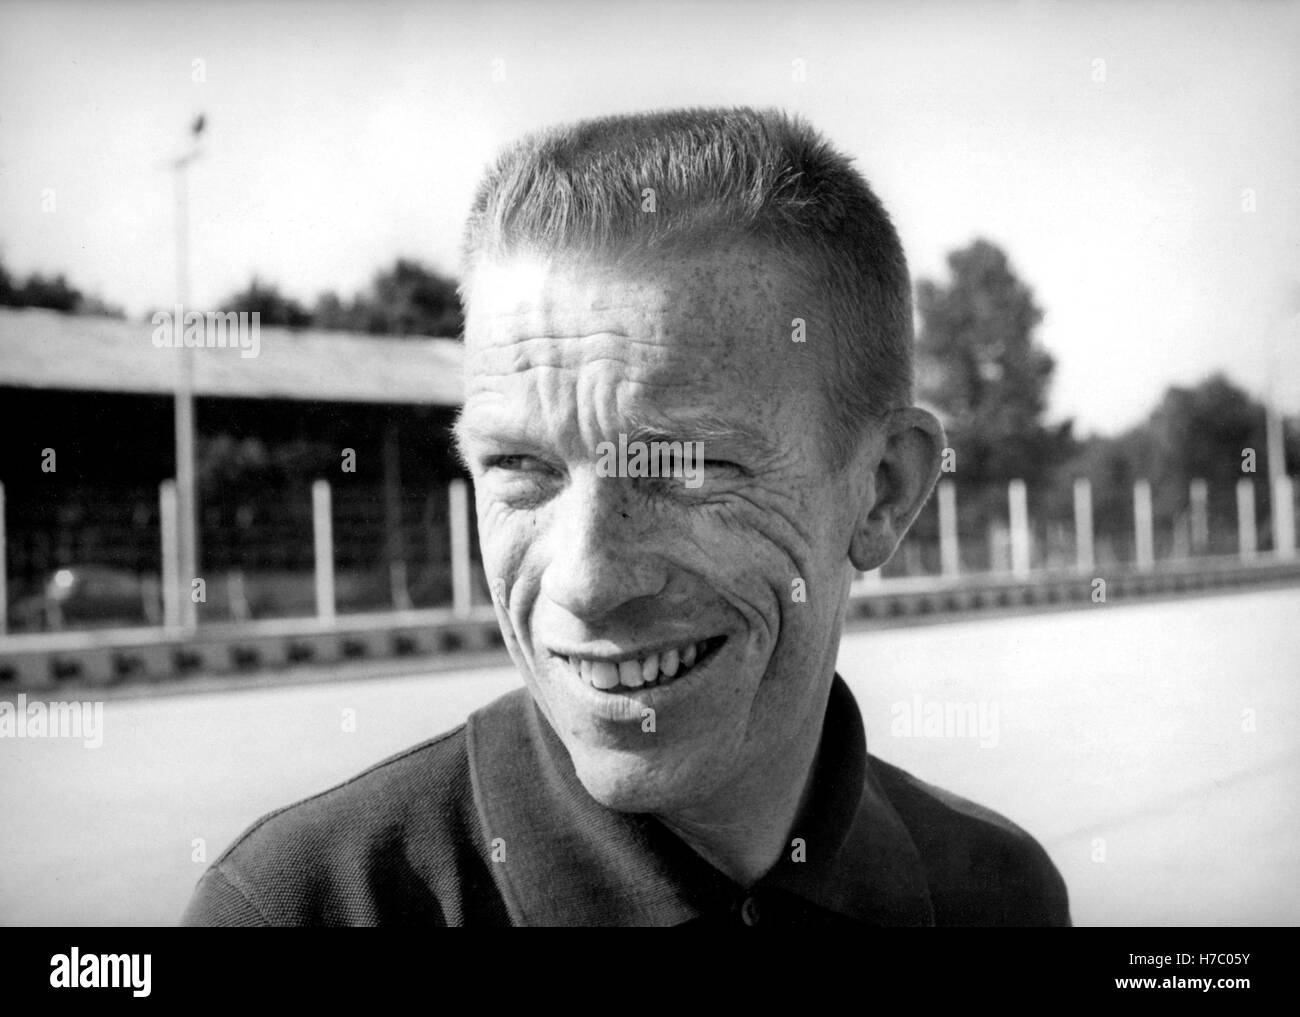 Richie Ginther 1963 Monza Stockfoto